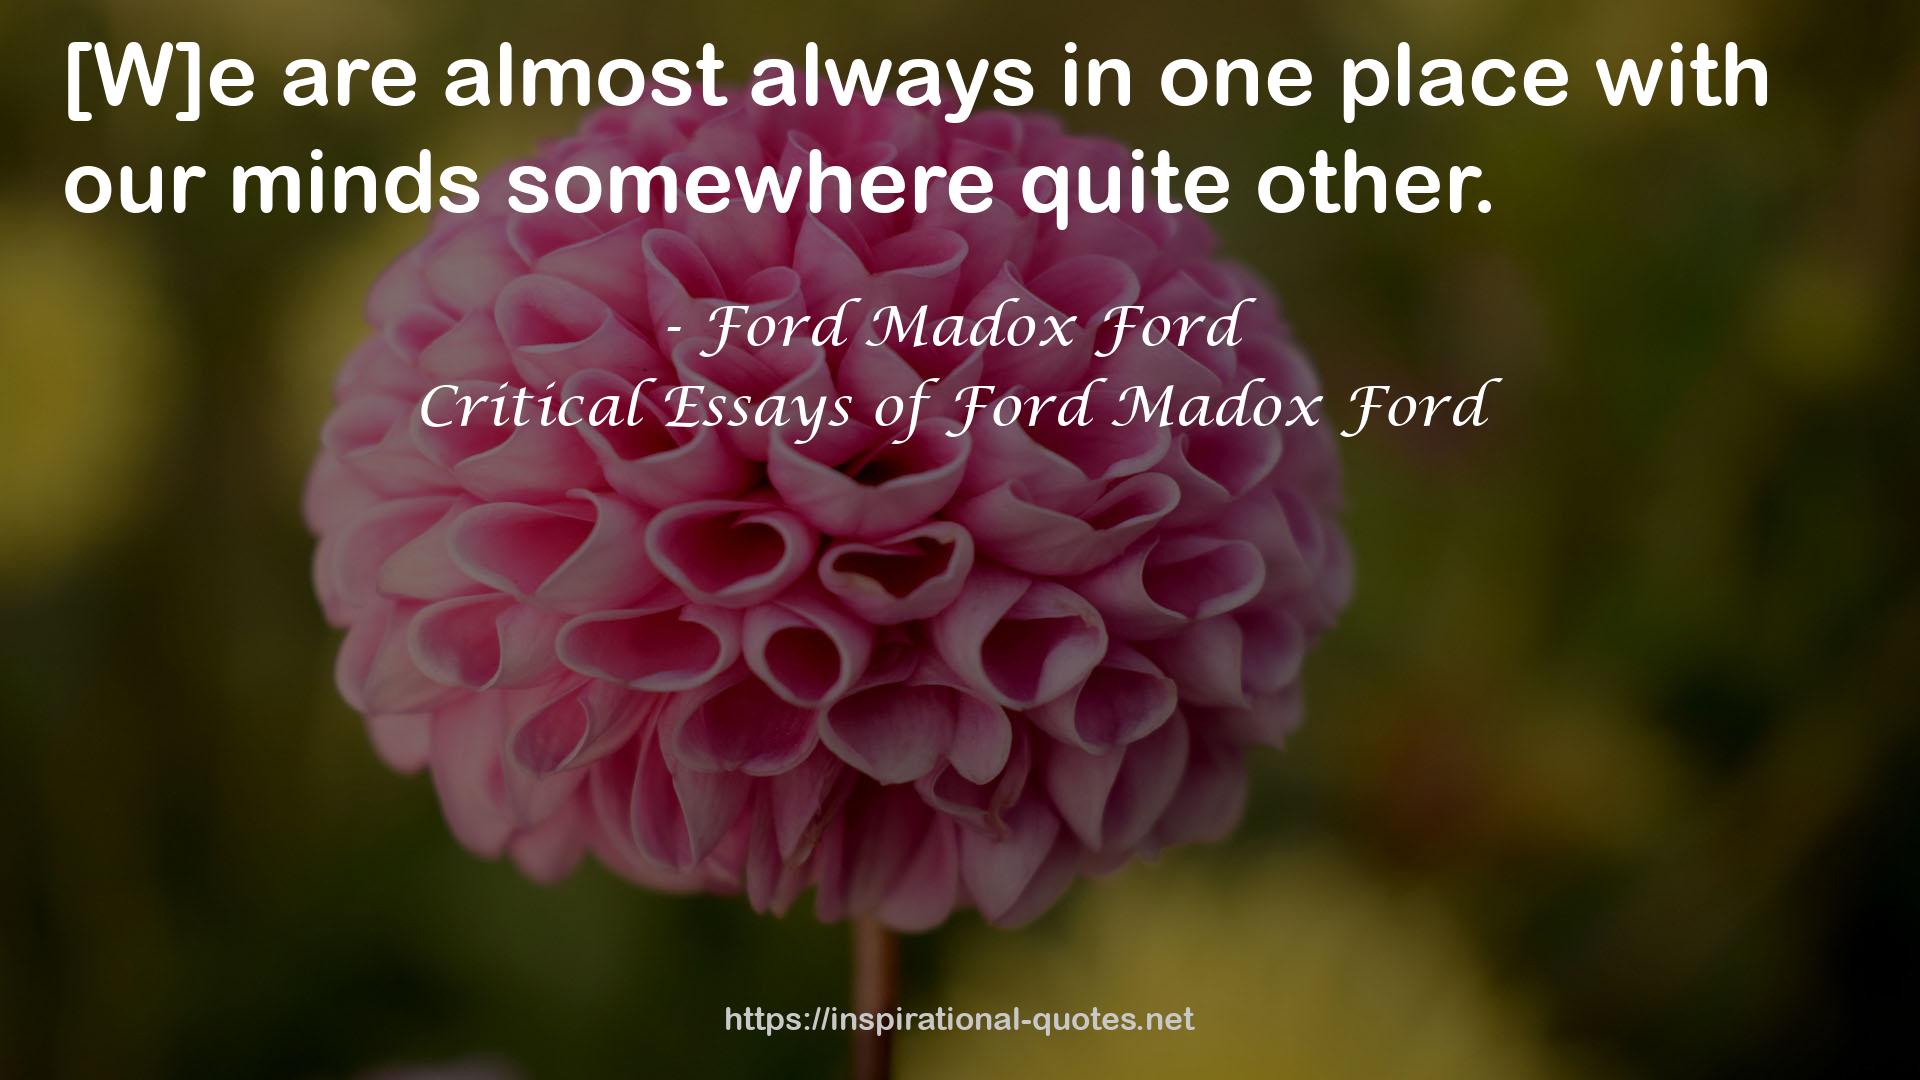 Critical Essays of Ford Madox Ford QUOTES